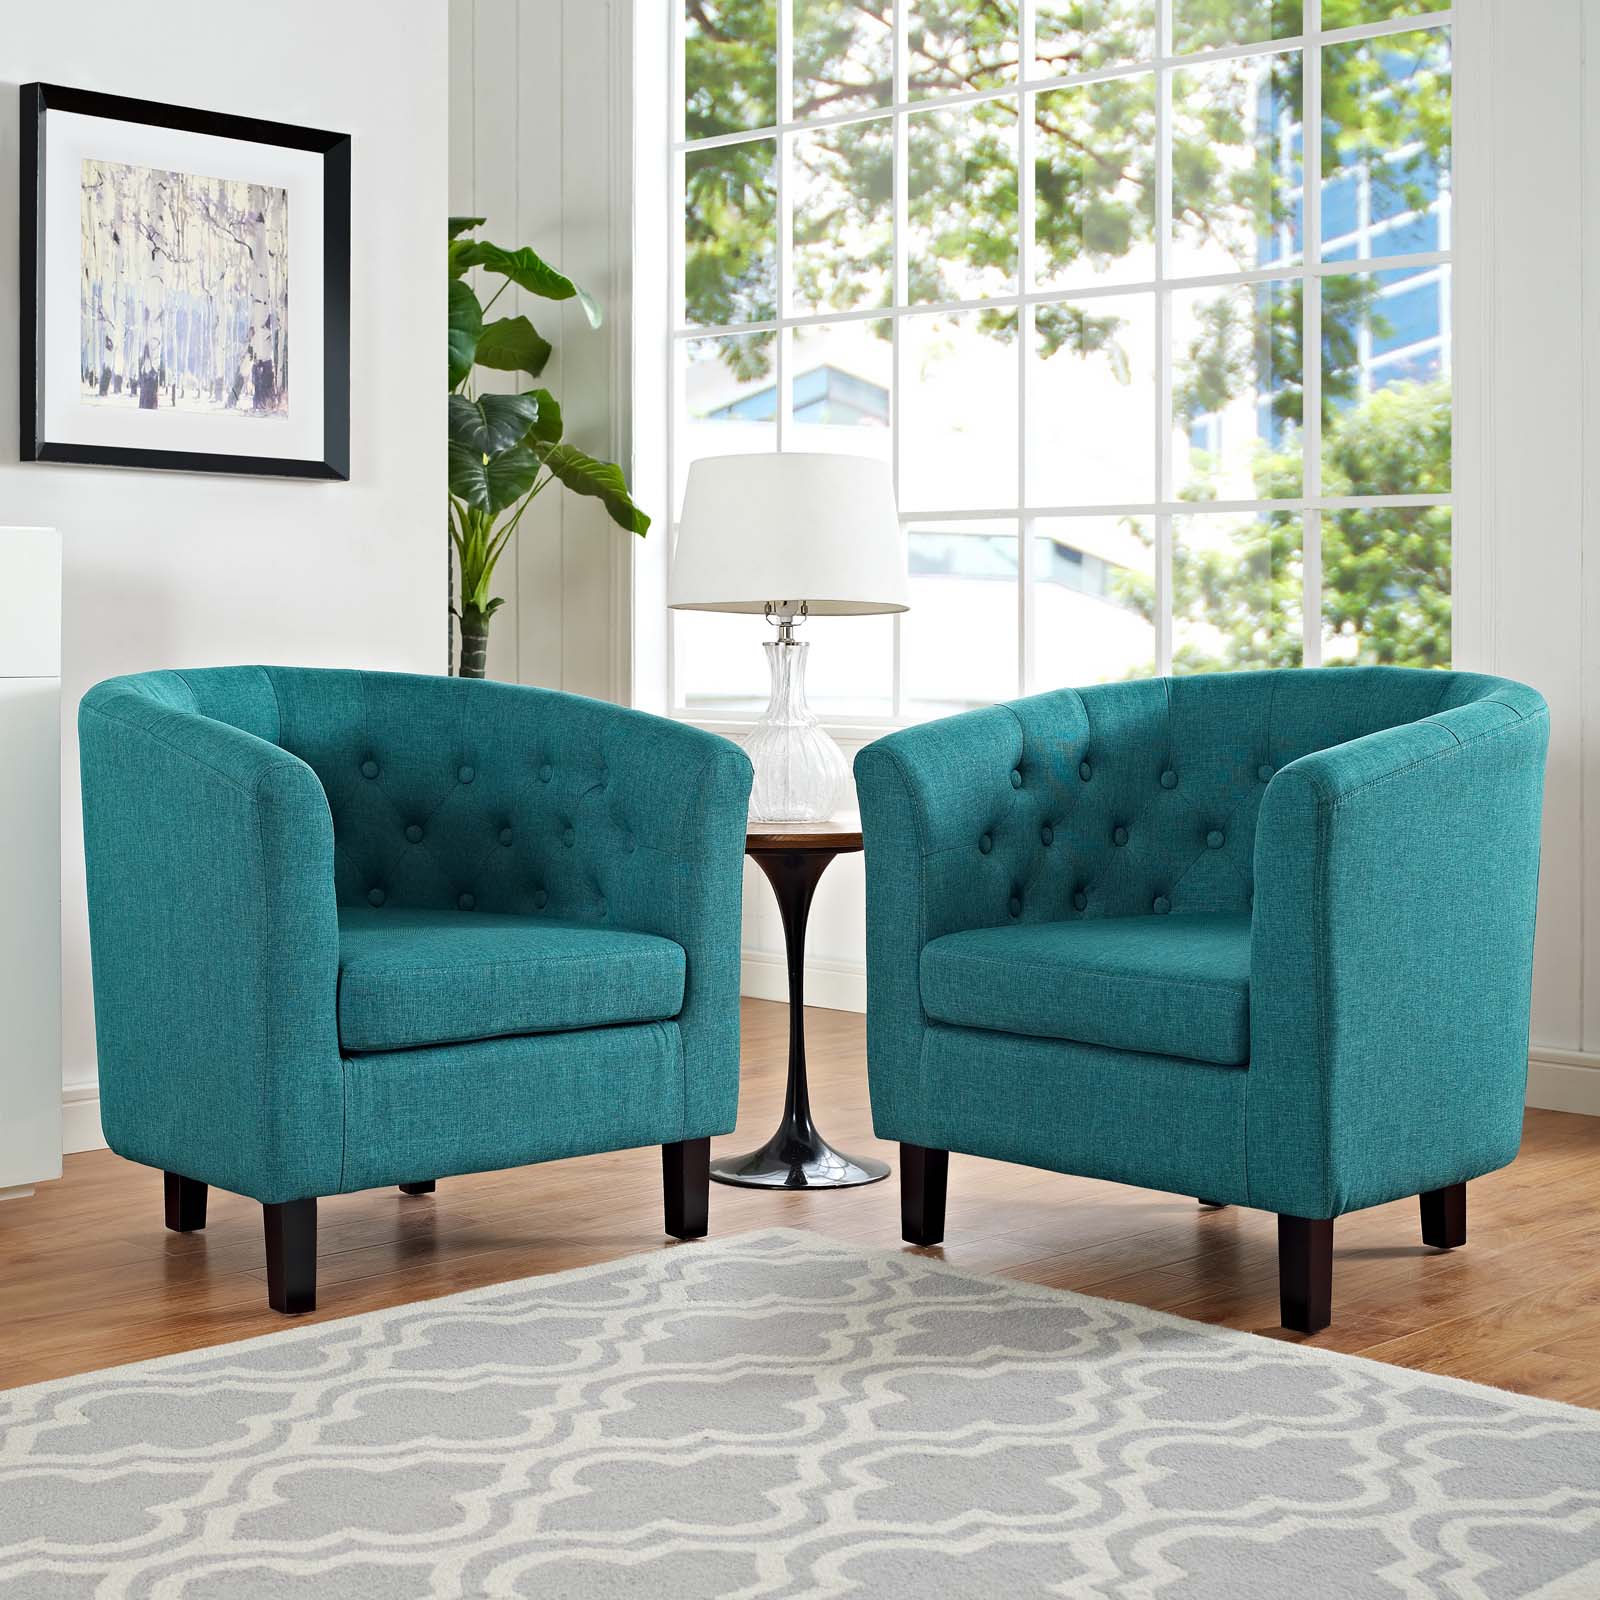 Prospect 2 Piece Upholstered Fabric Armchair Set Teal